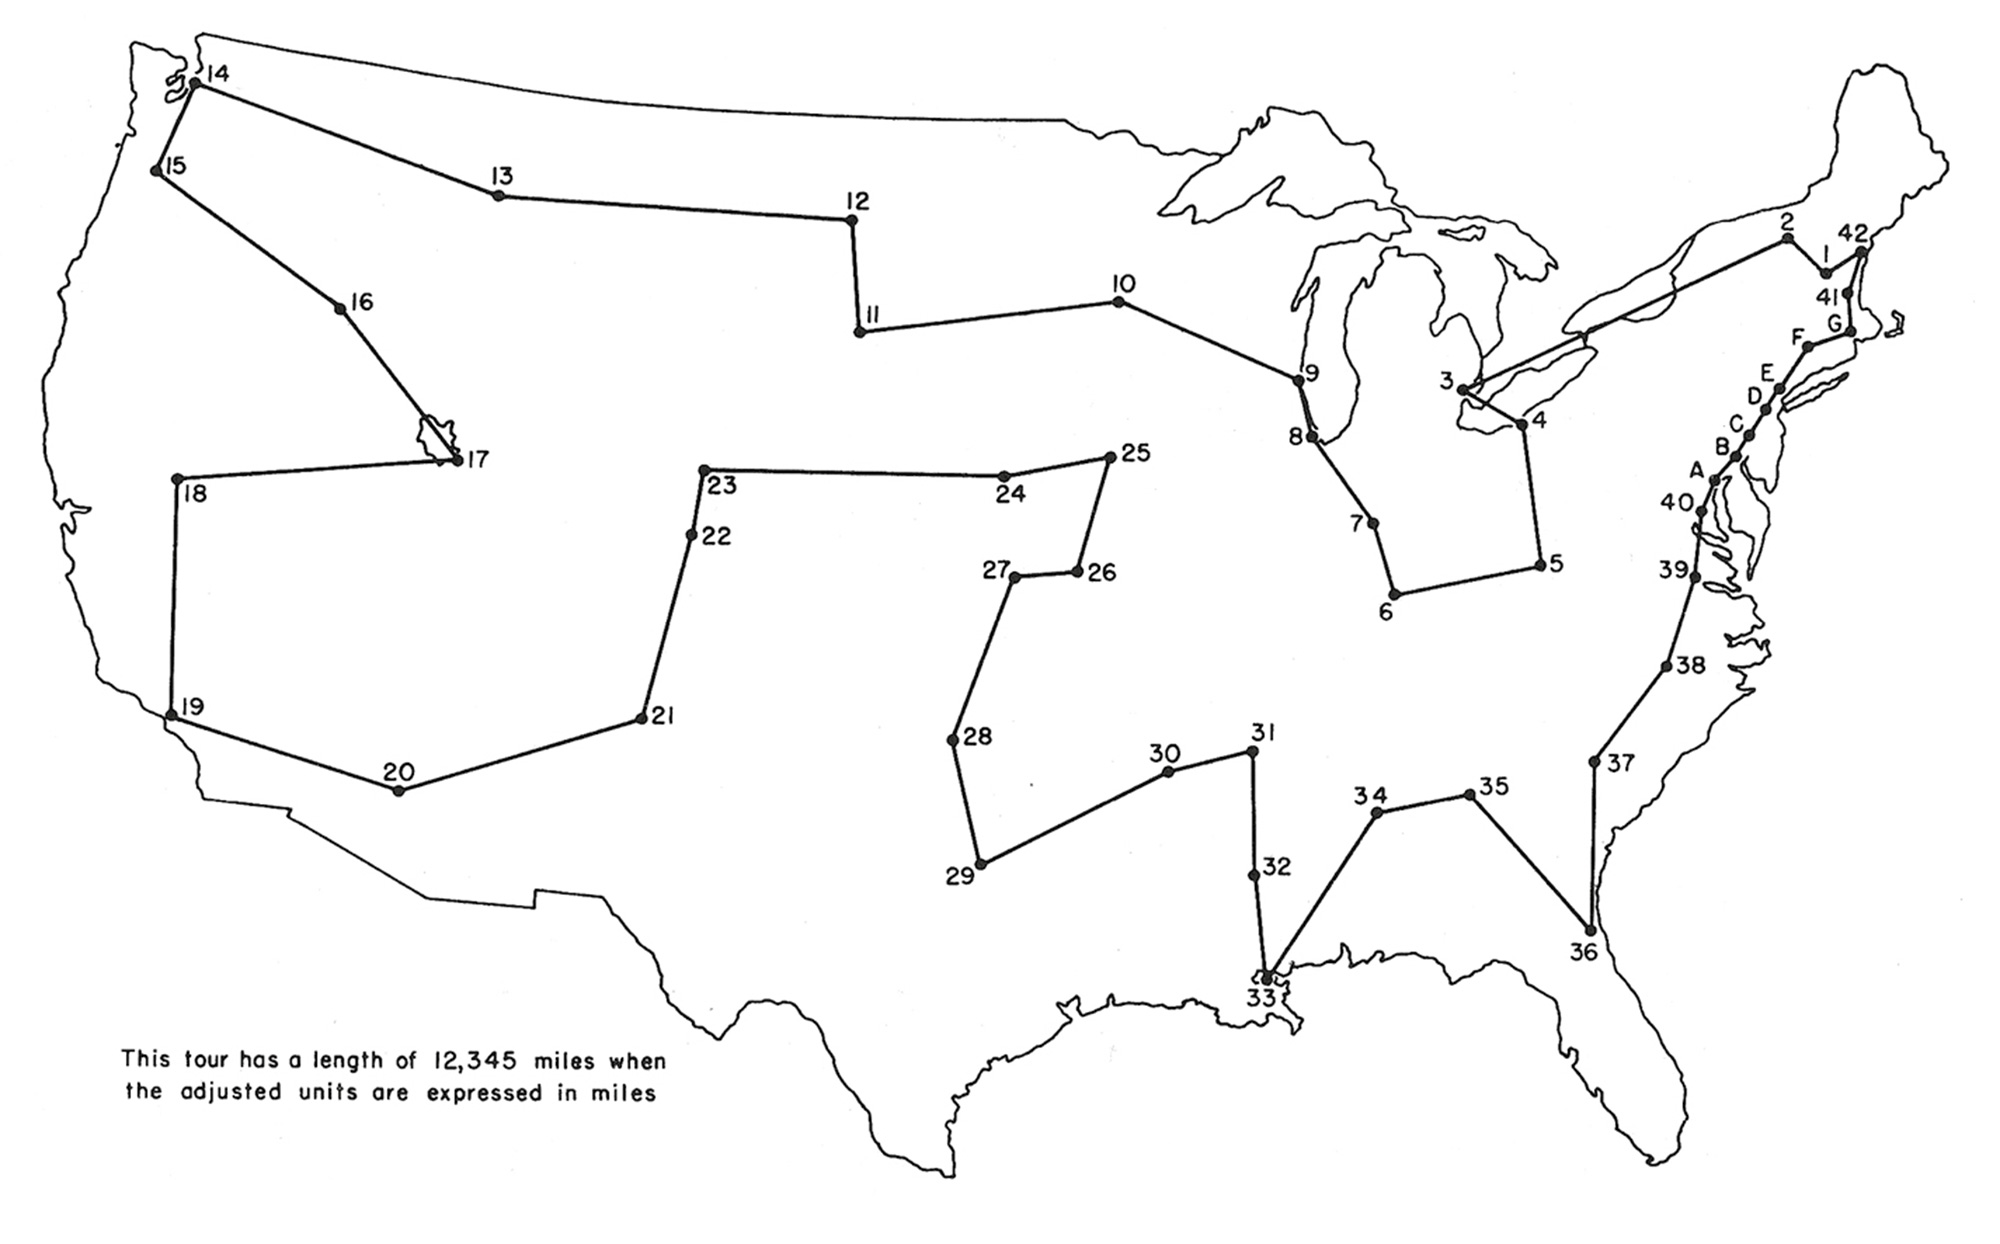 A map of the United States plotted with a 12,345 mile Traveling Salesman problem.